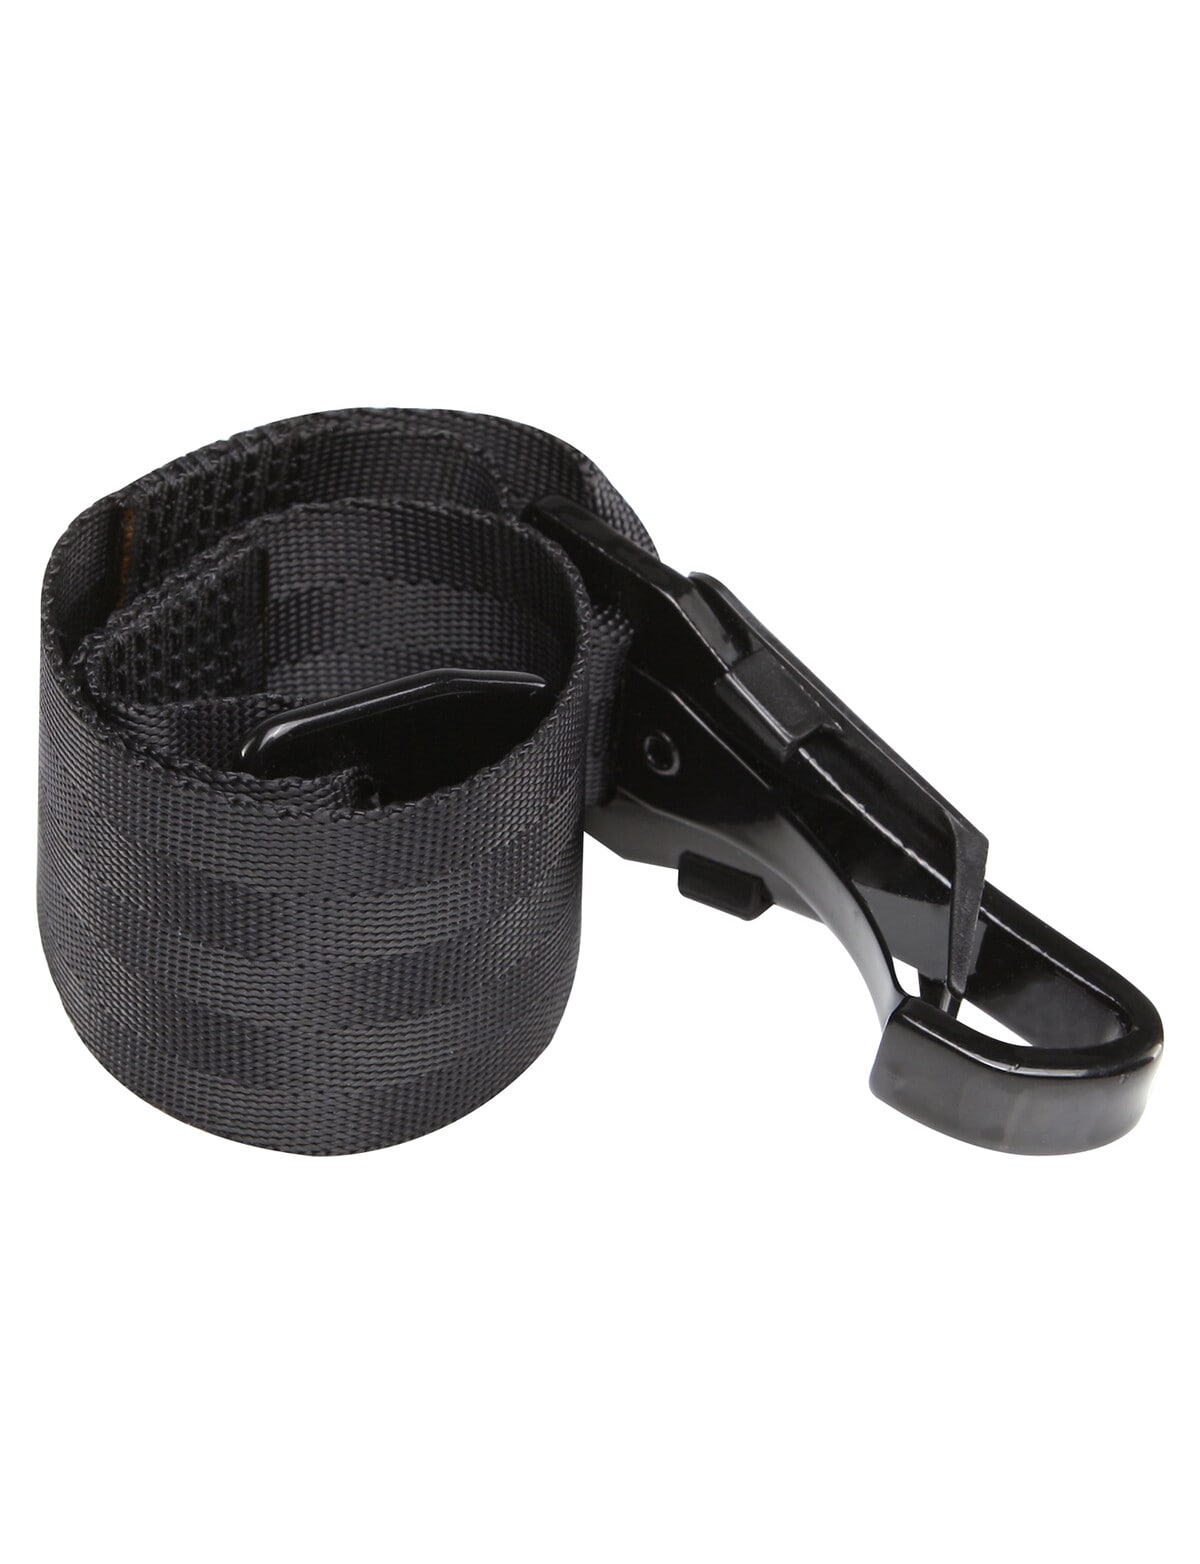 Infa Secure Extension Strap, 300mm - Car Seats & Travelling